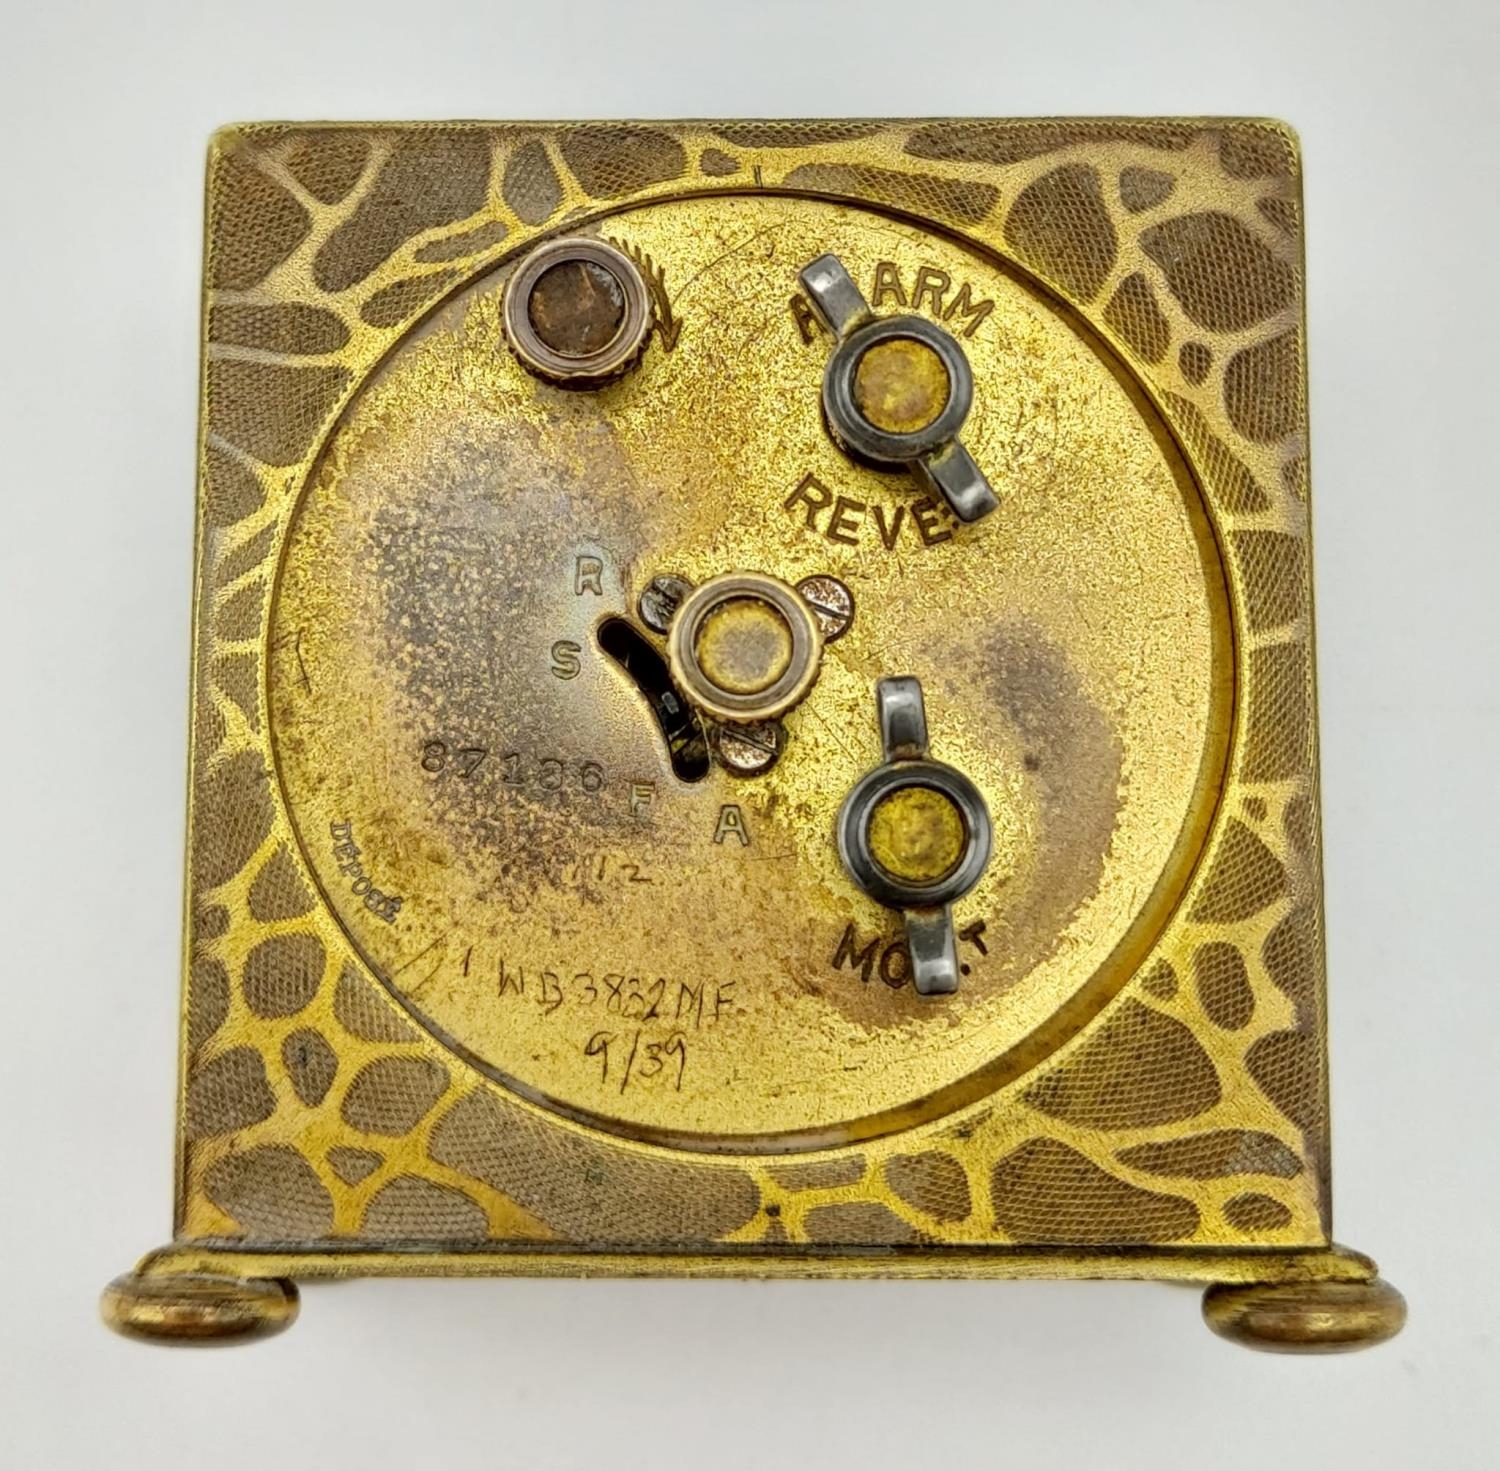 An Early French Travel Alarm Clock - Patented. In a rockery pattern. 5 x 5cm. In working order. - Image 8 of 8